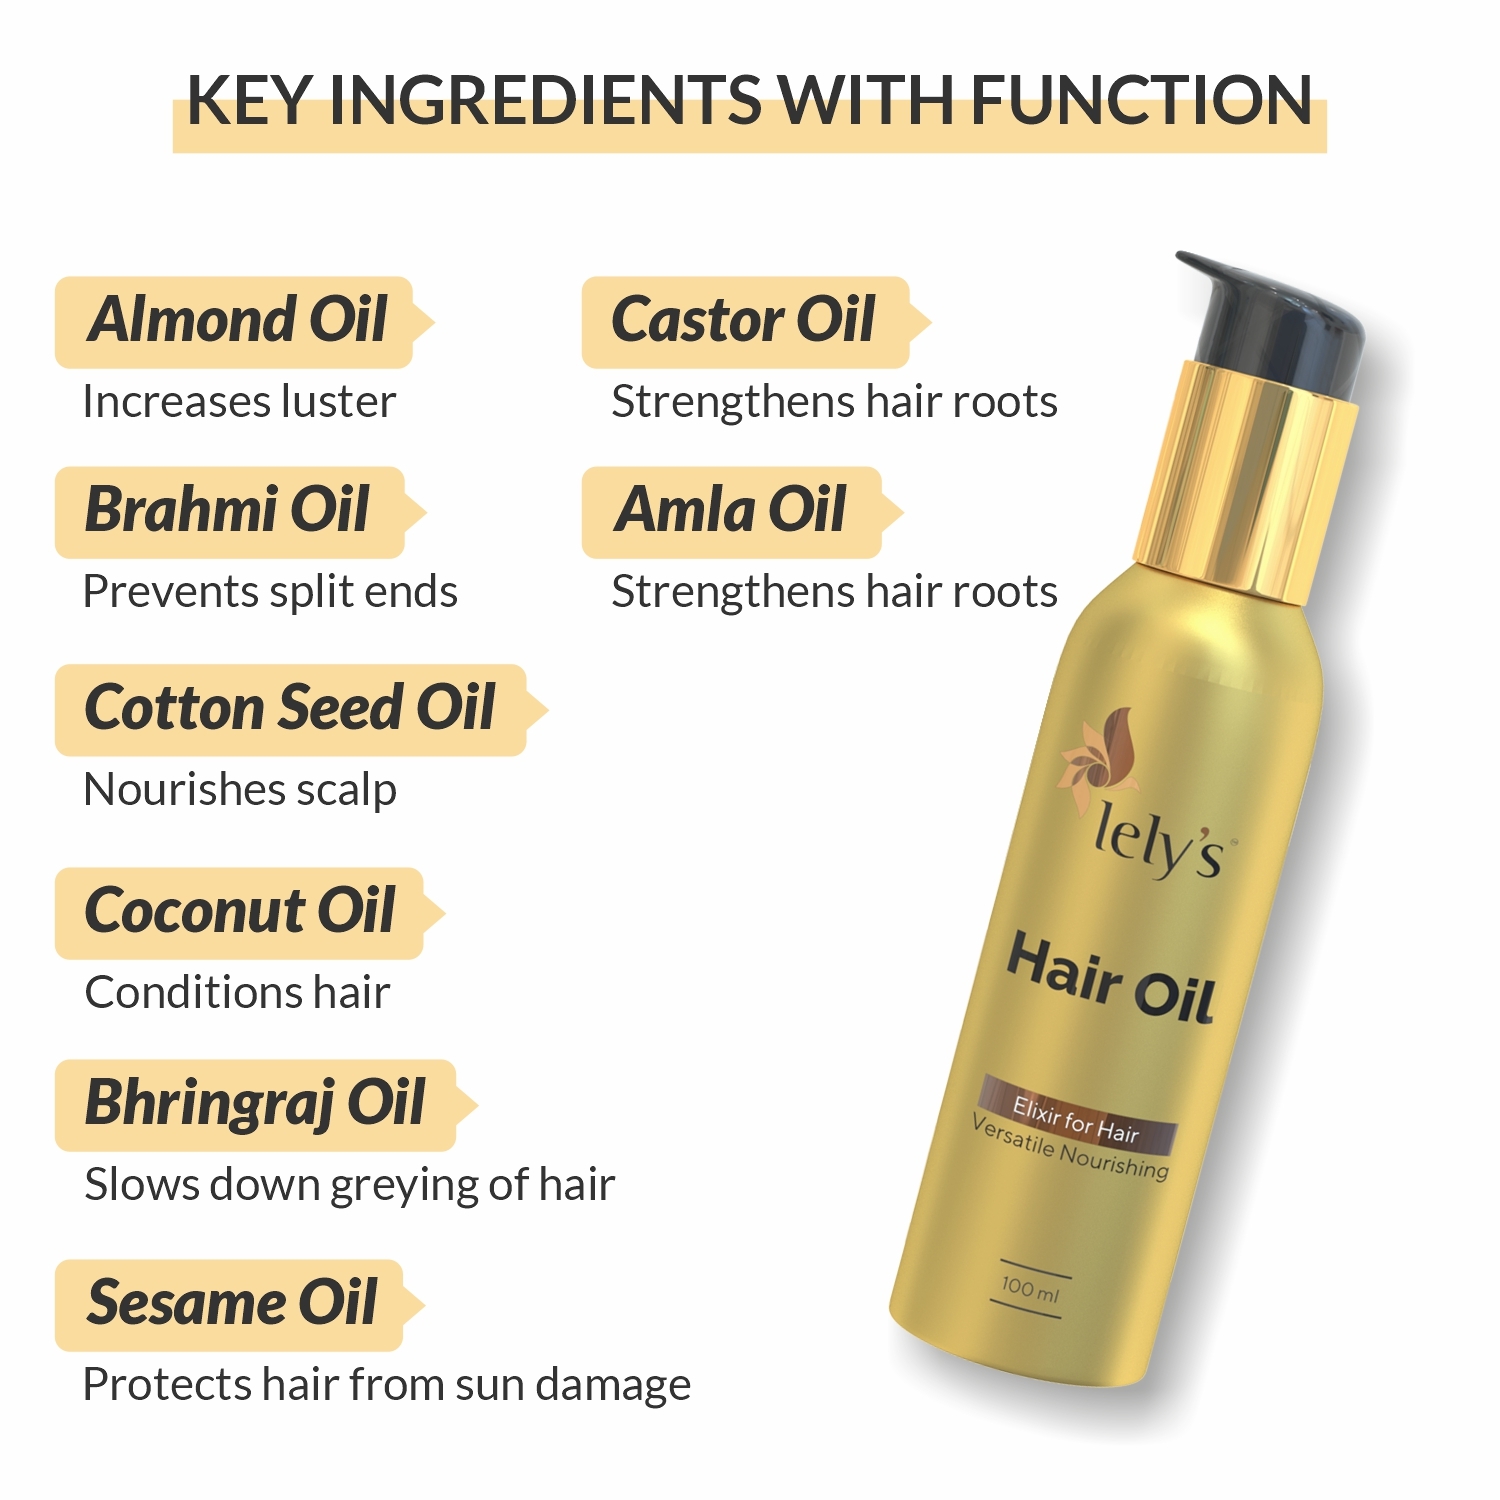 lely's | Lely’s Hair Oil For Hair Growth - Transforms Dry-Brittle Hair Into Silky, Reduces Hair Fall, Shiny And Smooth Hair, Soft And Firm Hair, Repairs Split Ends, Control Hair Damage - 100 Ml 3